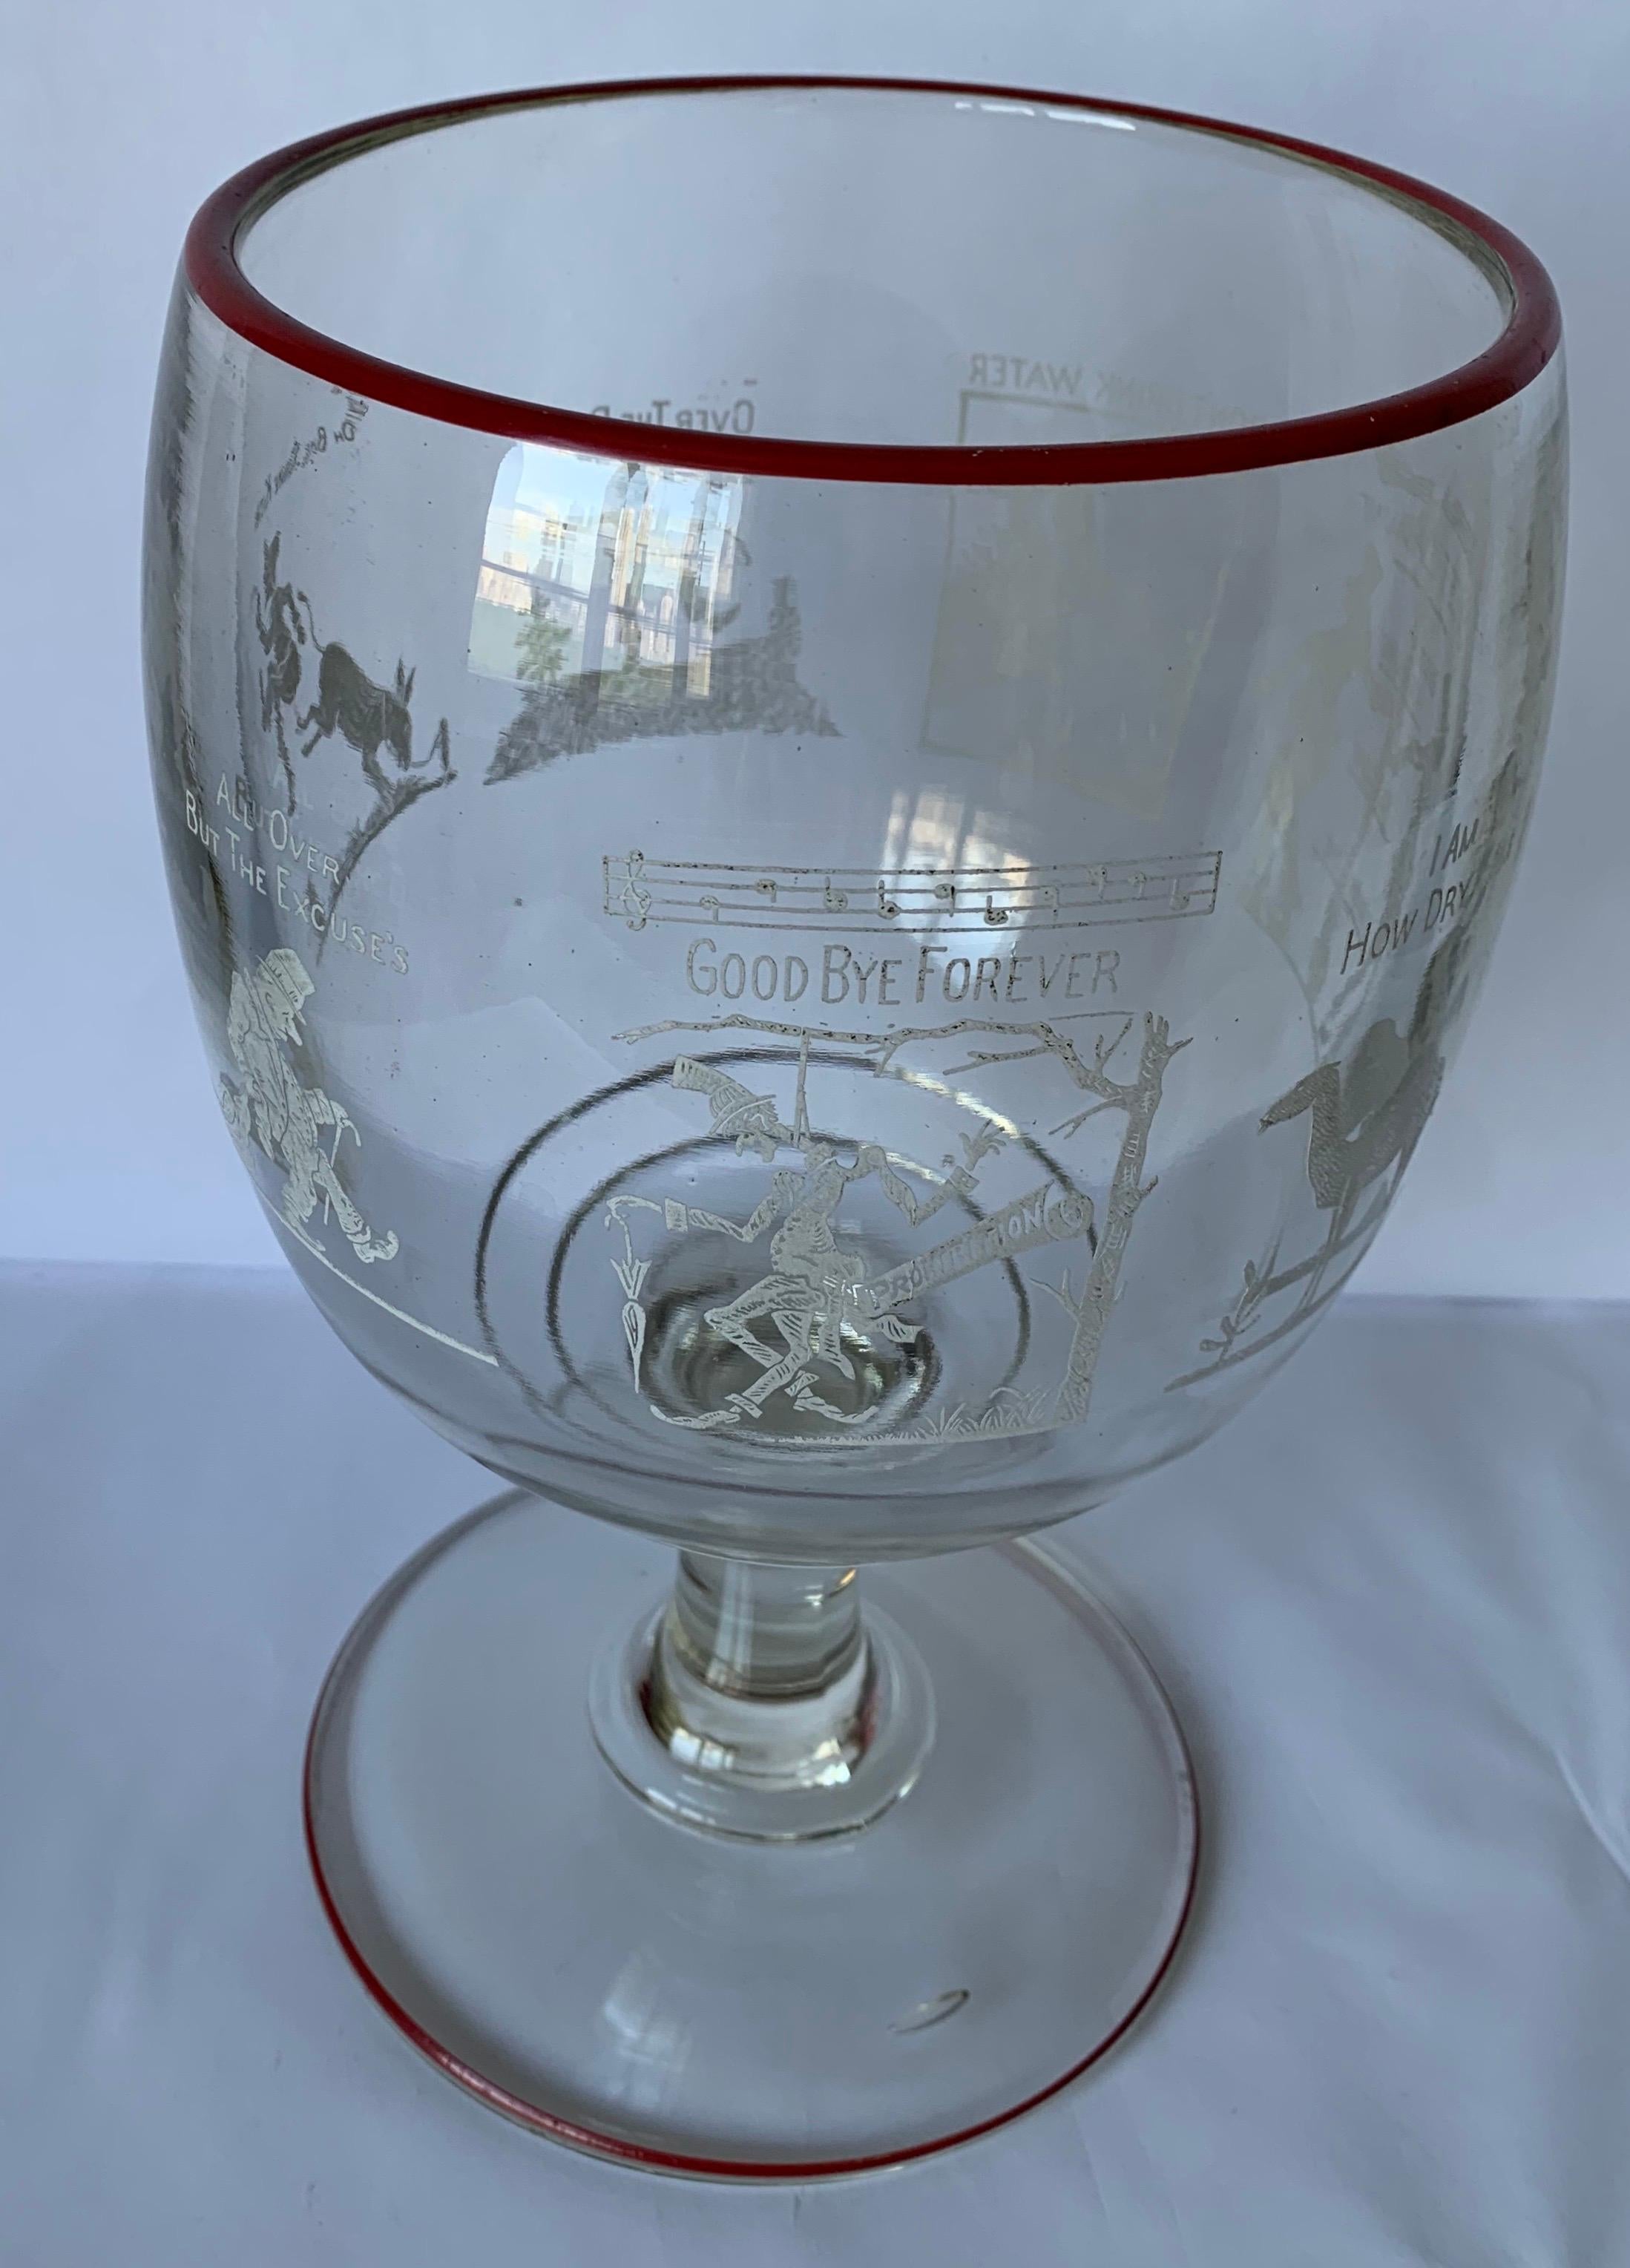 Large glass footed bowl with red glass rim. Various whimsical drinking idioms and a recipe for ‘Sweet Adeline’ surround the bowl.